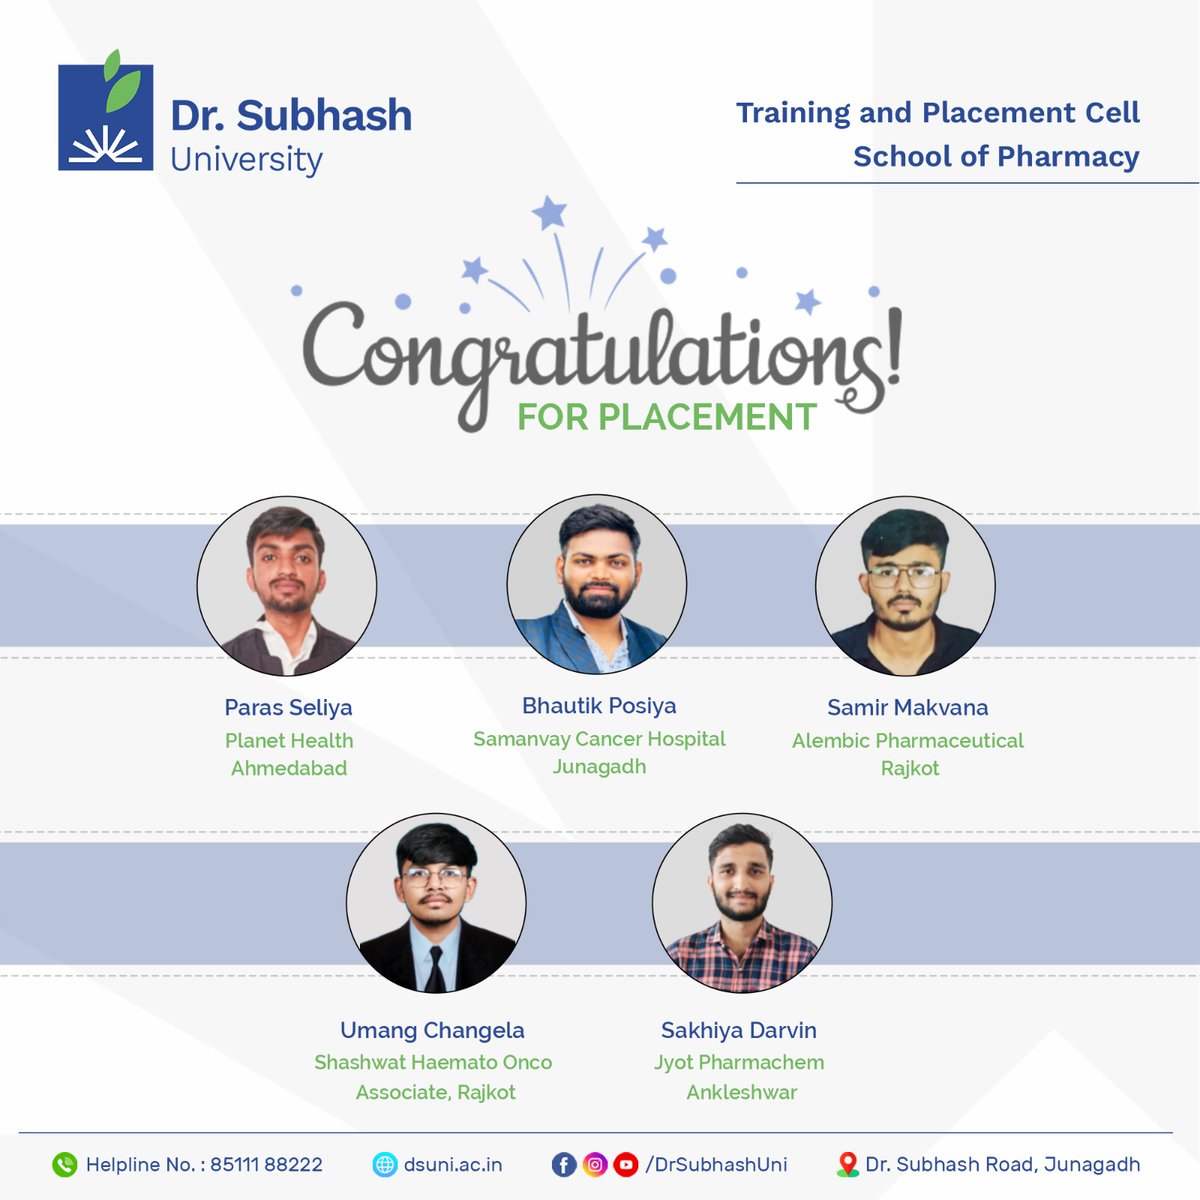 Meet the talented individuals from our Training and Placement Cell at the School of Pharmacy! 👩‍🔬👨‍🔬 They're making waves in the world of healthcare and pharmaceuticals: success stories! 🎓💊 #SchoolofPharmacy #TalentSpotlight #DSU #DrSubhashUniversity